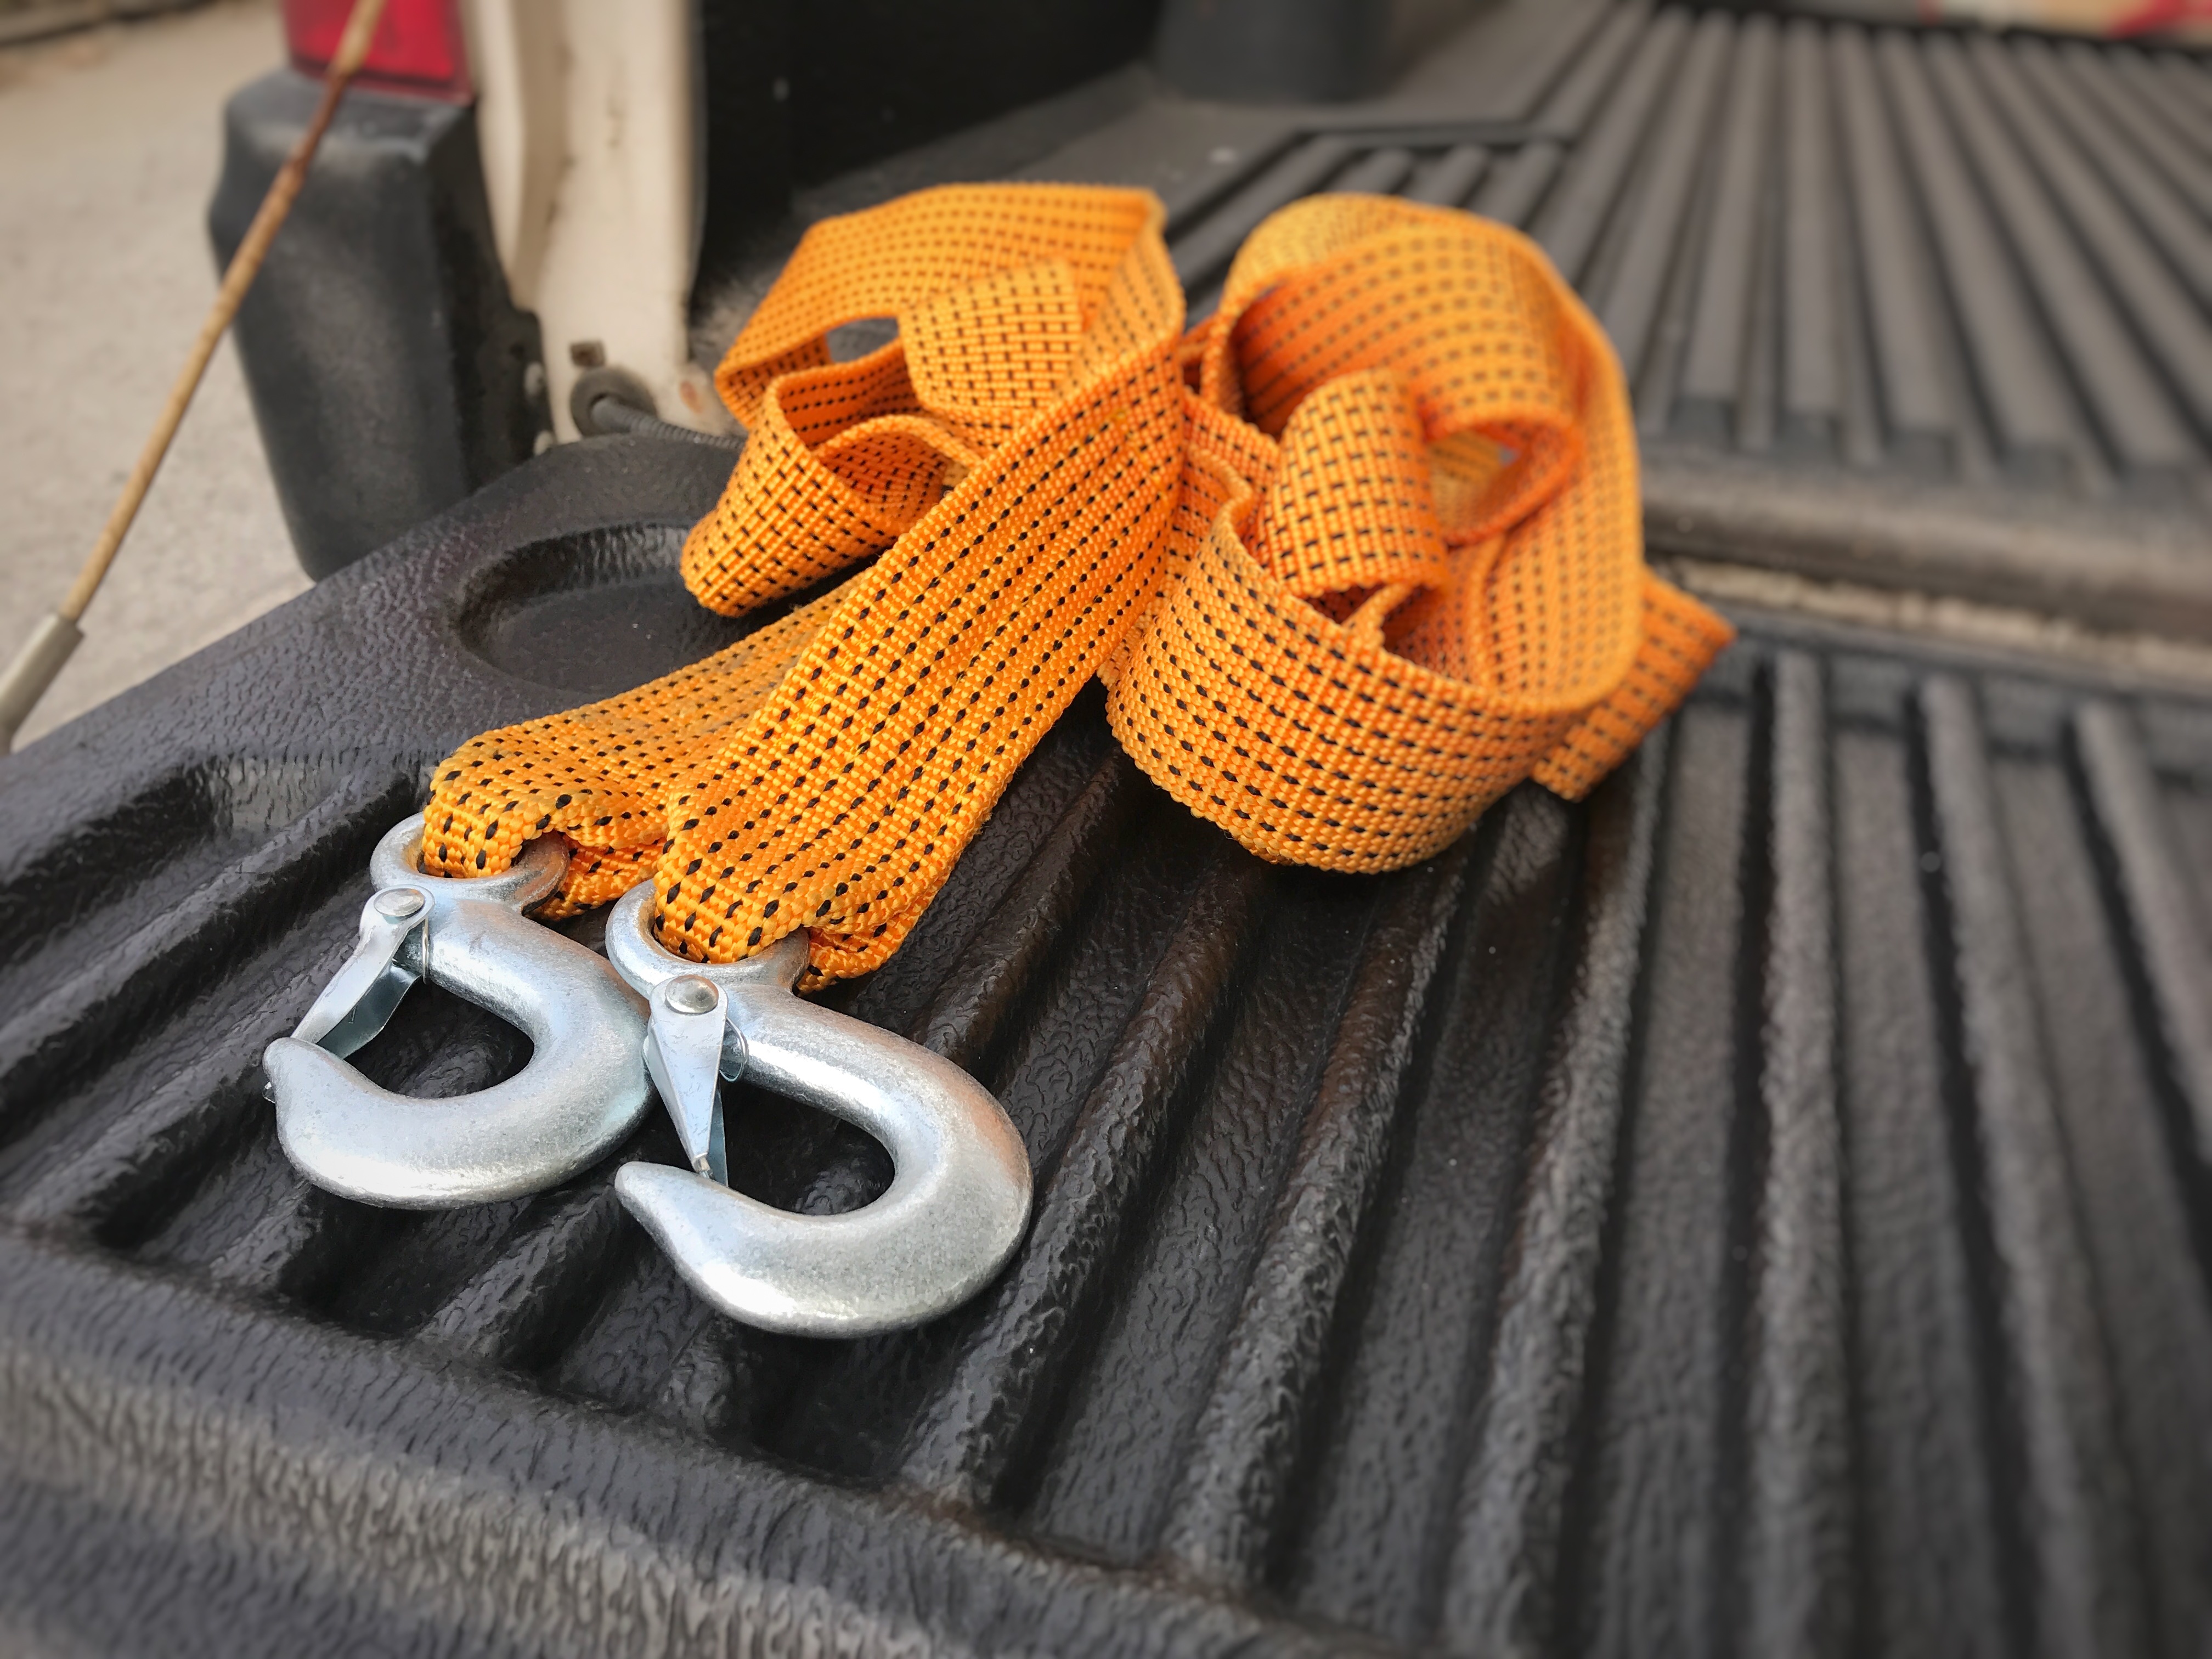 tow straps on truck bed